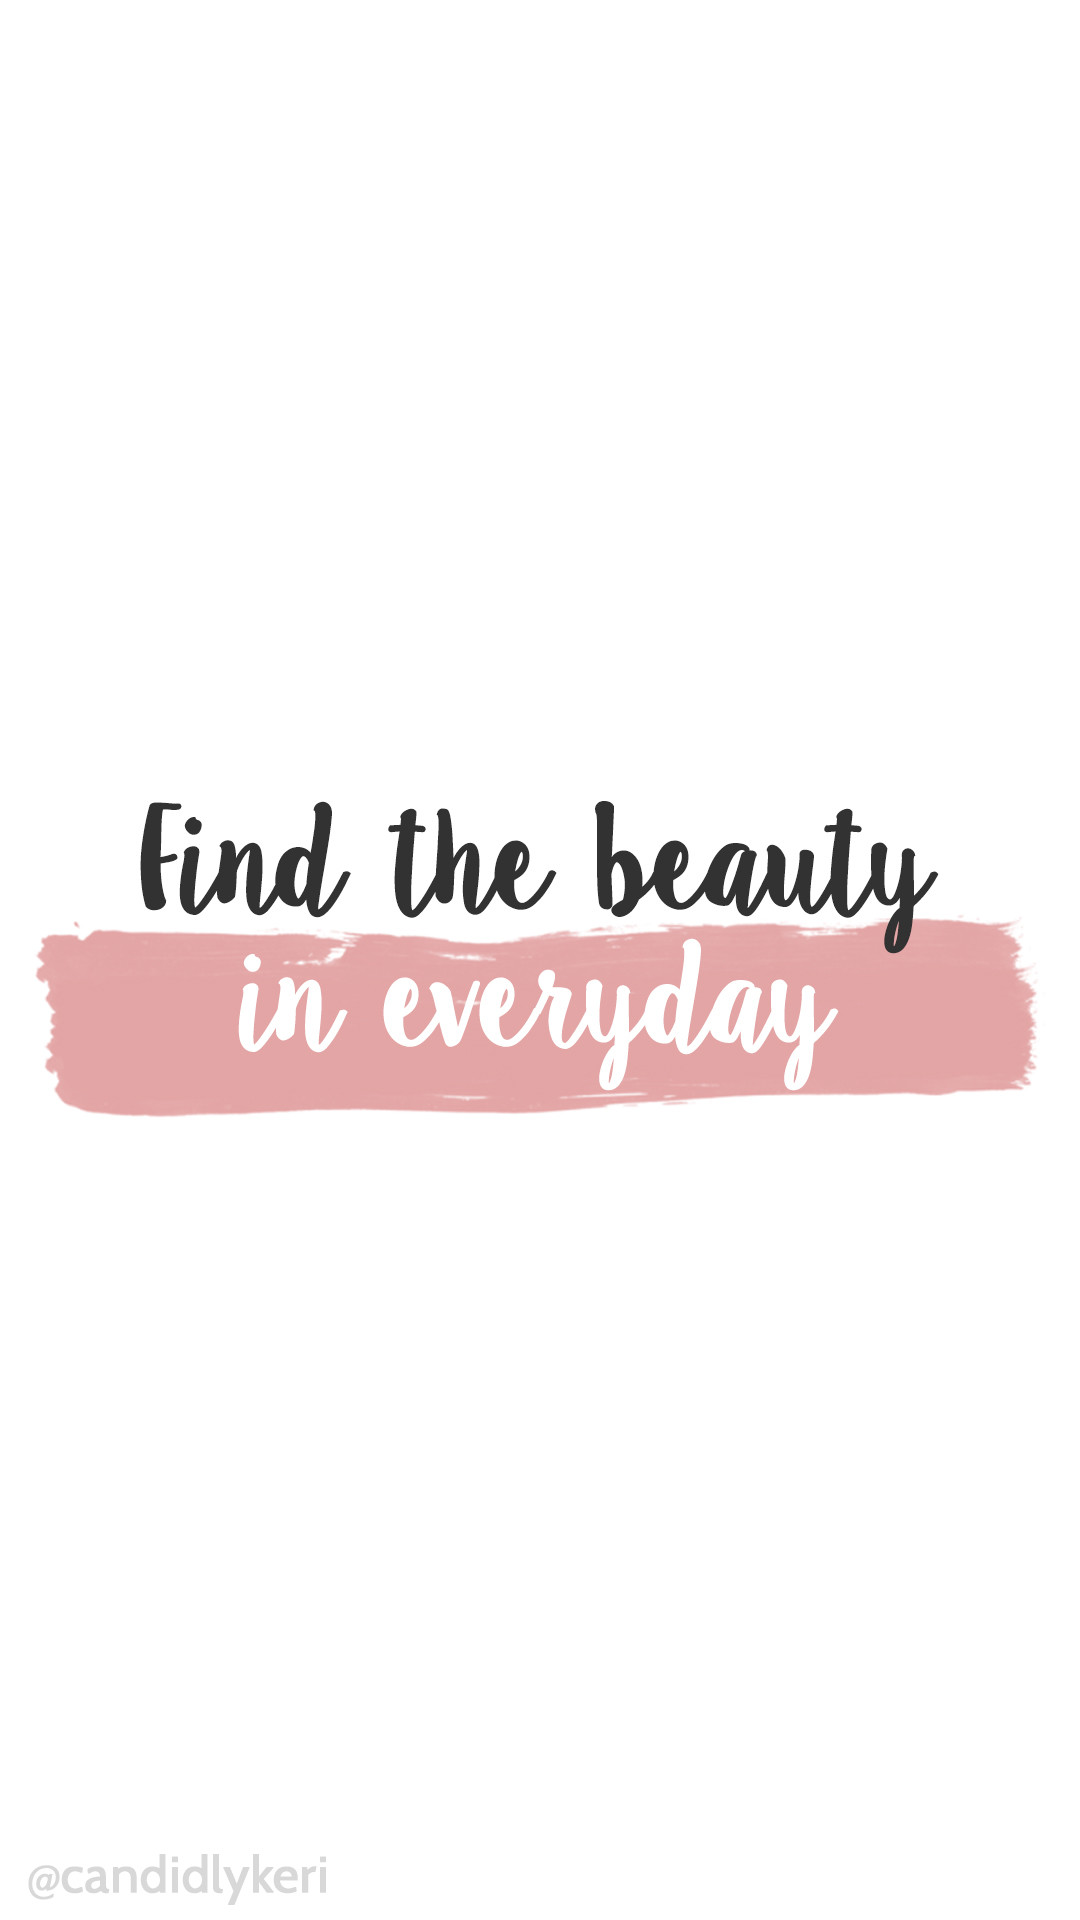 1080x1920 Find the beauty in every day pink watercolor paint stripe background  wallpaper you can download for